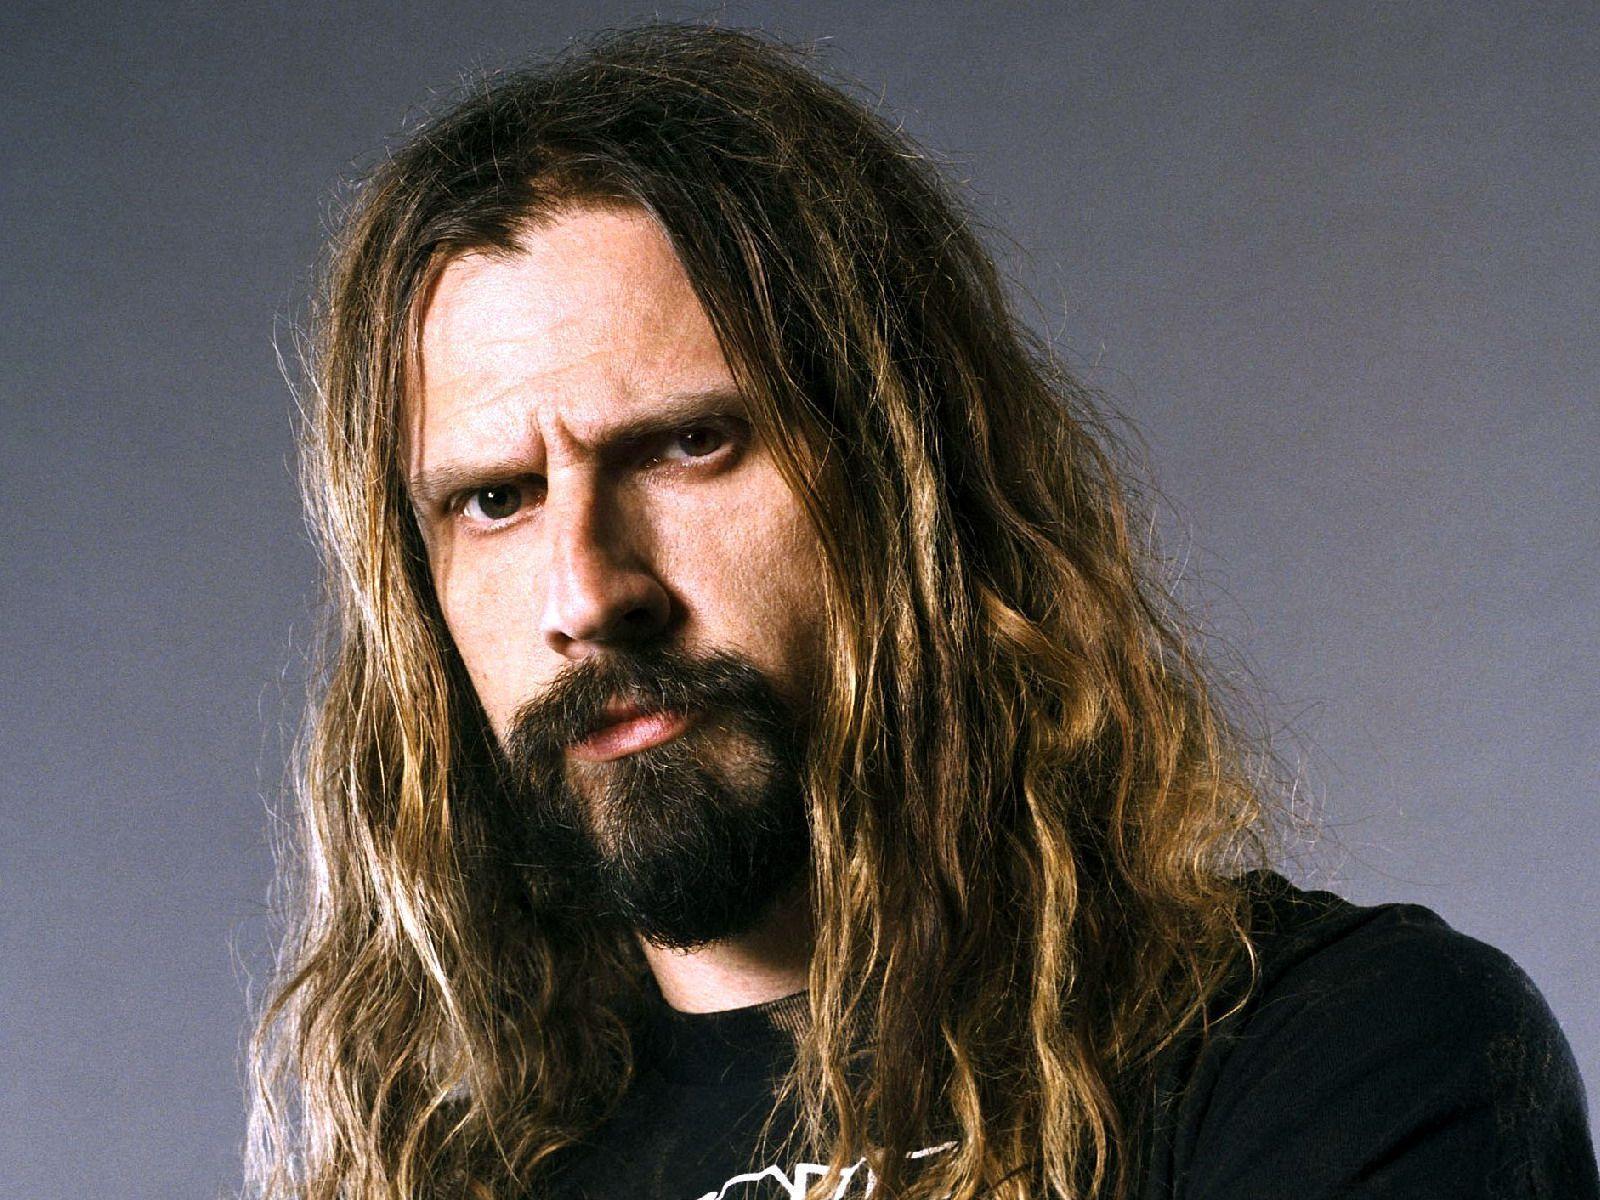 Rob Zombie Moves Forward With New Horror Film 31